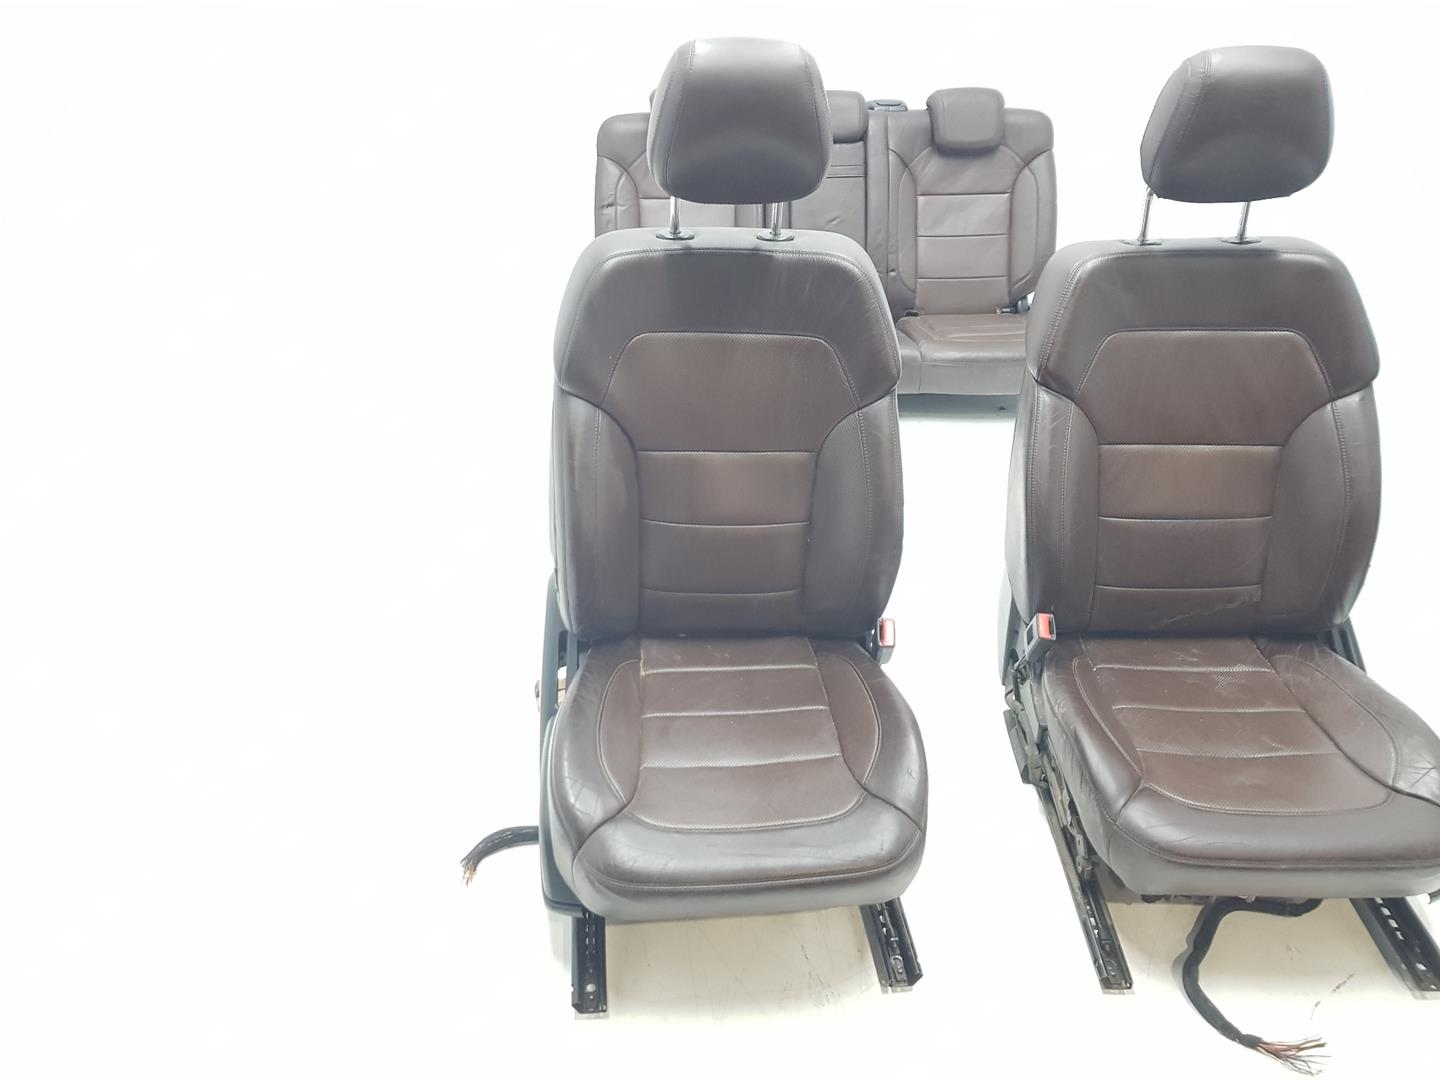 MERCEDES-BENZ M-Class W166 (2011-2015) Seats ASIENTOSCUERO, ASIENTOSELECTRICOS, SOLOPANELCONDUCTOR 24148791